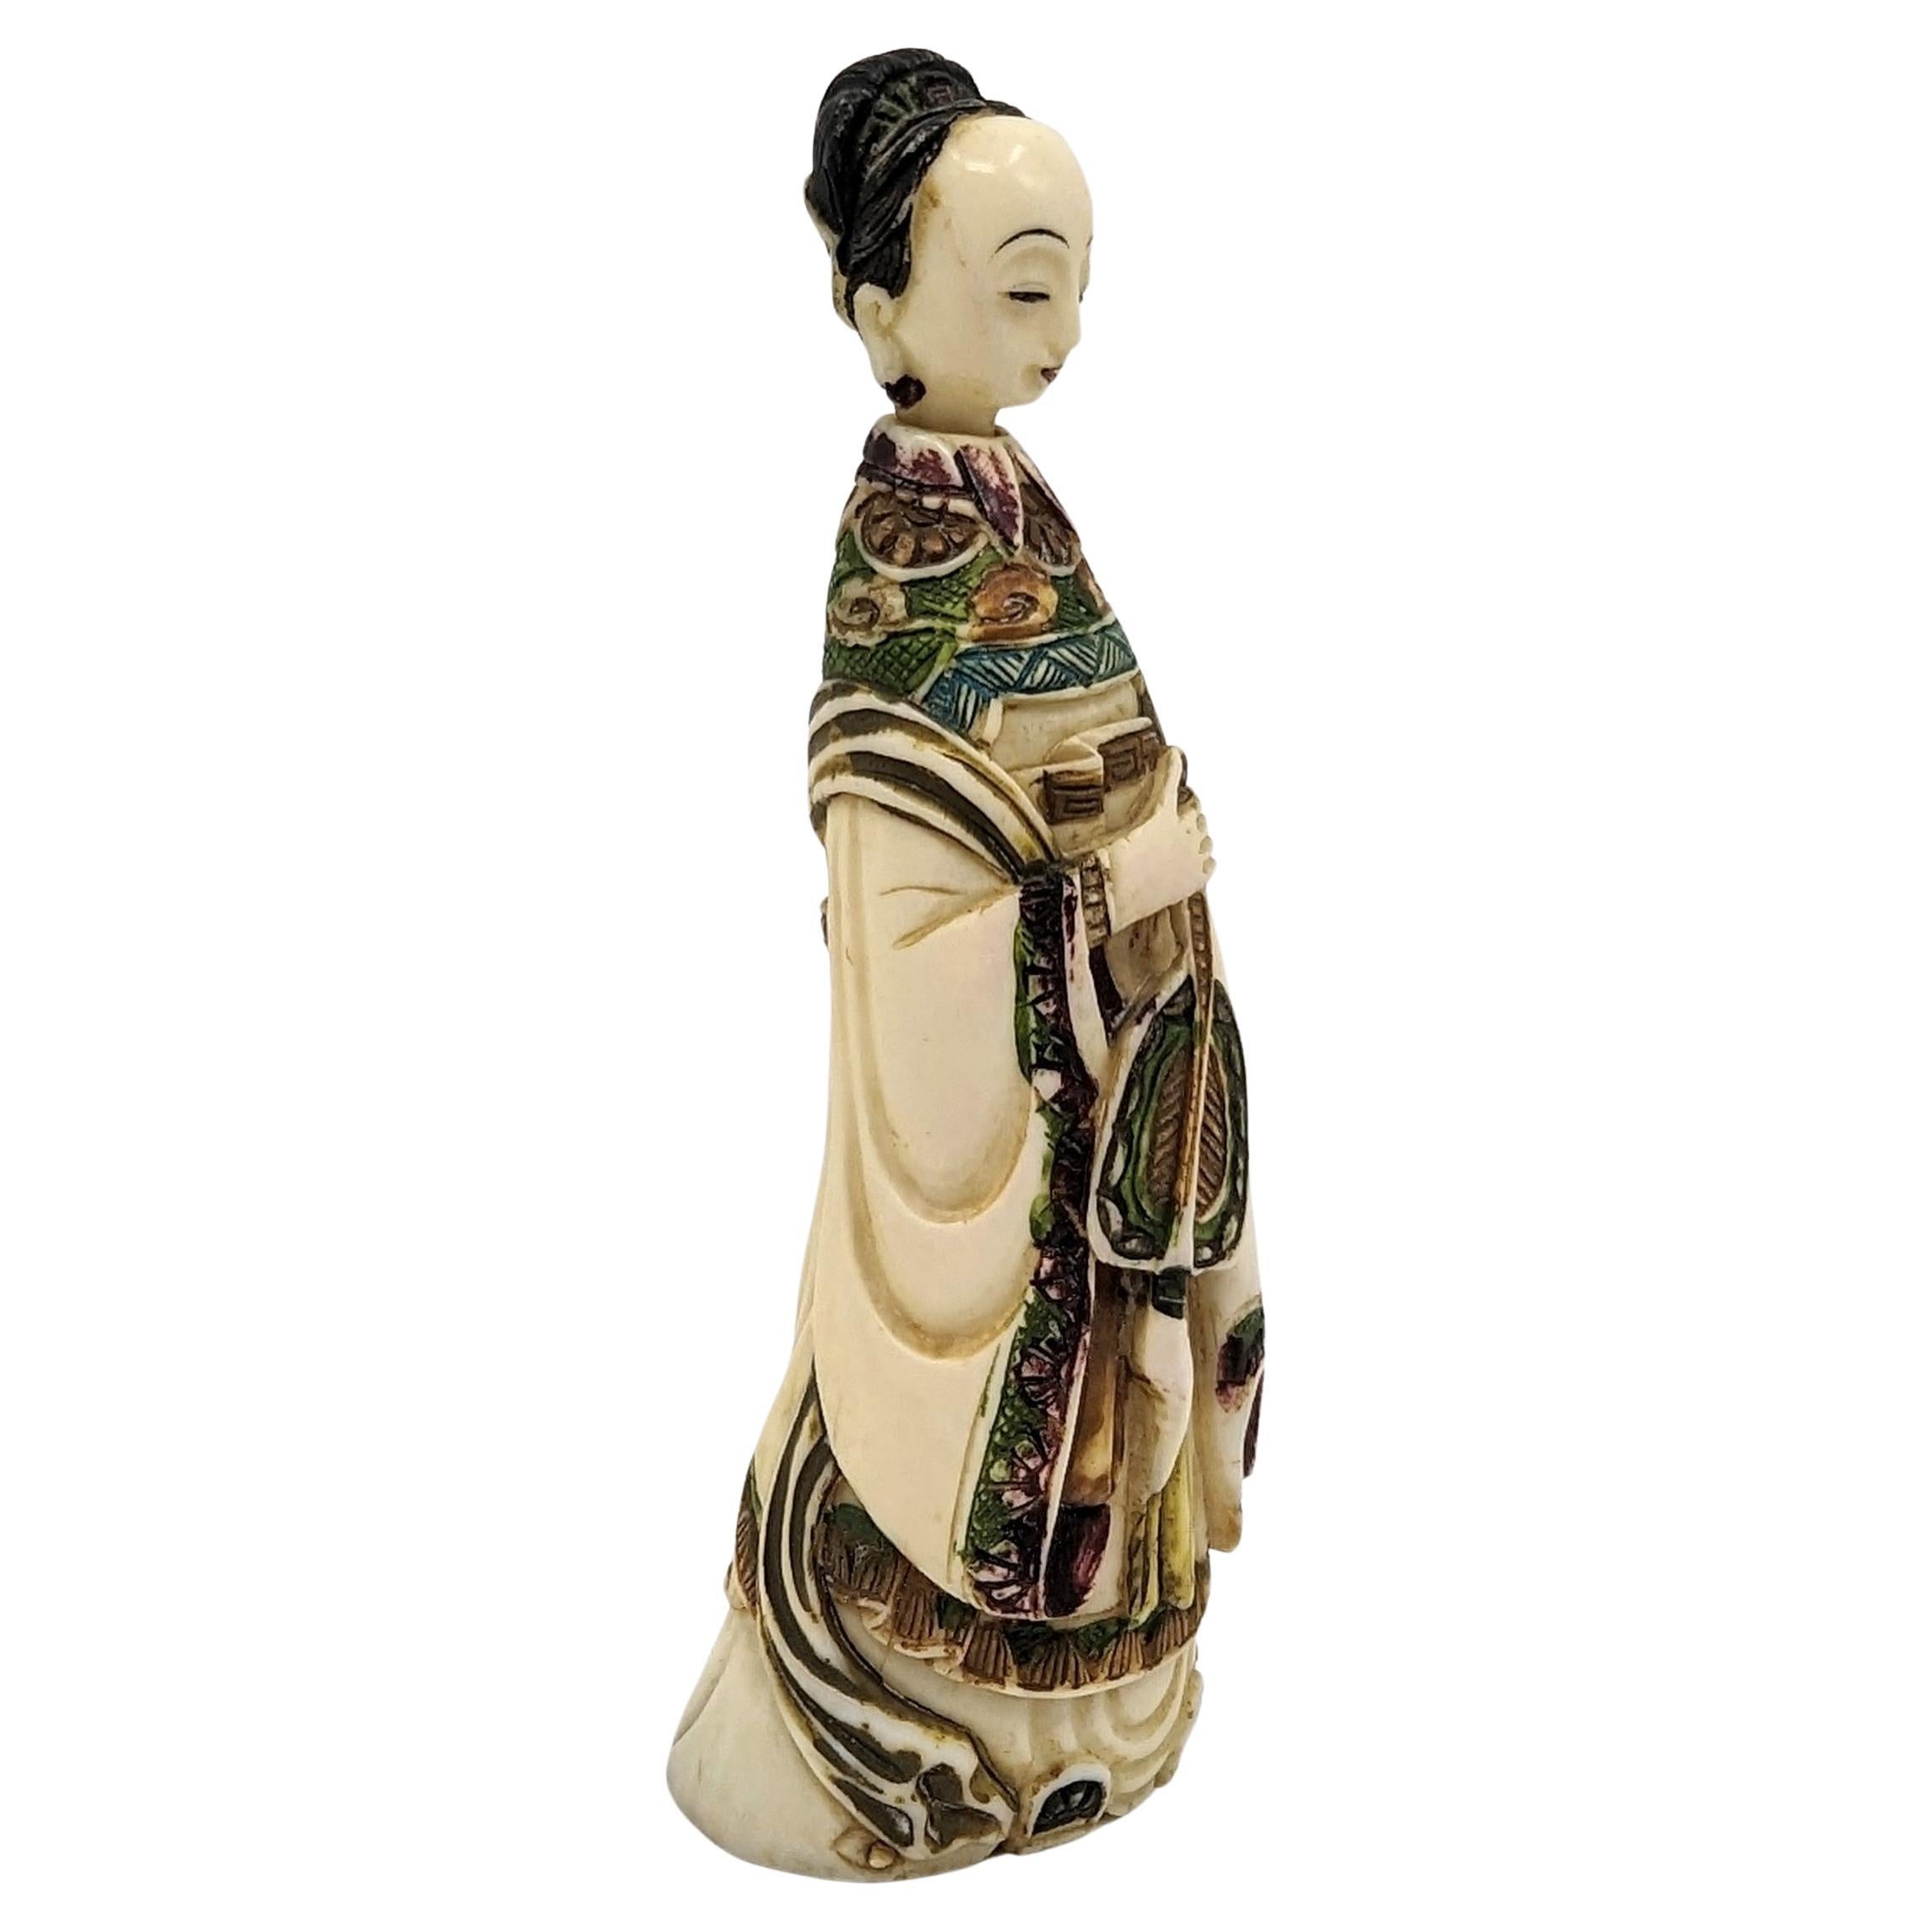 Antique Chinese Carved Court Lady Figure Snuff Bottle 18th-19th Century Qing